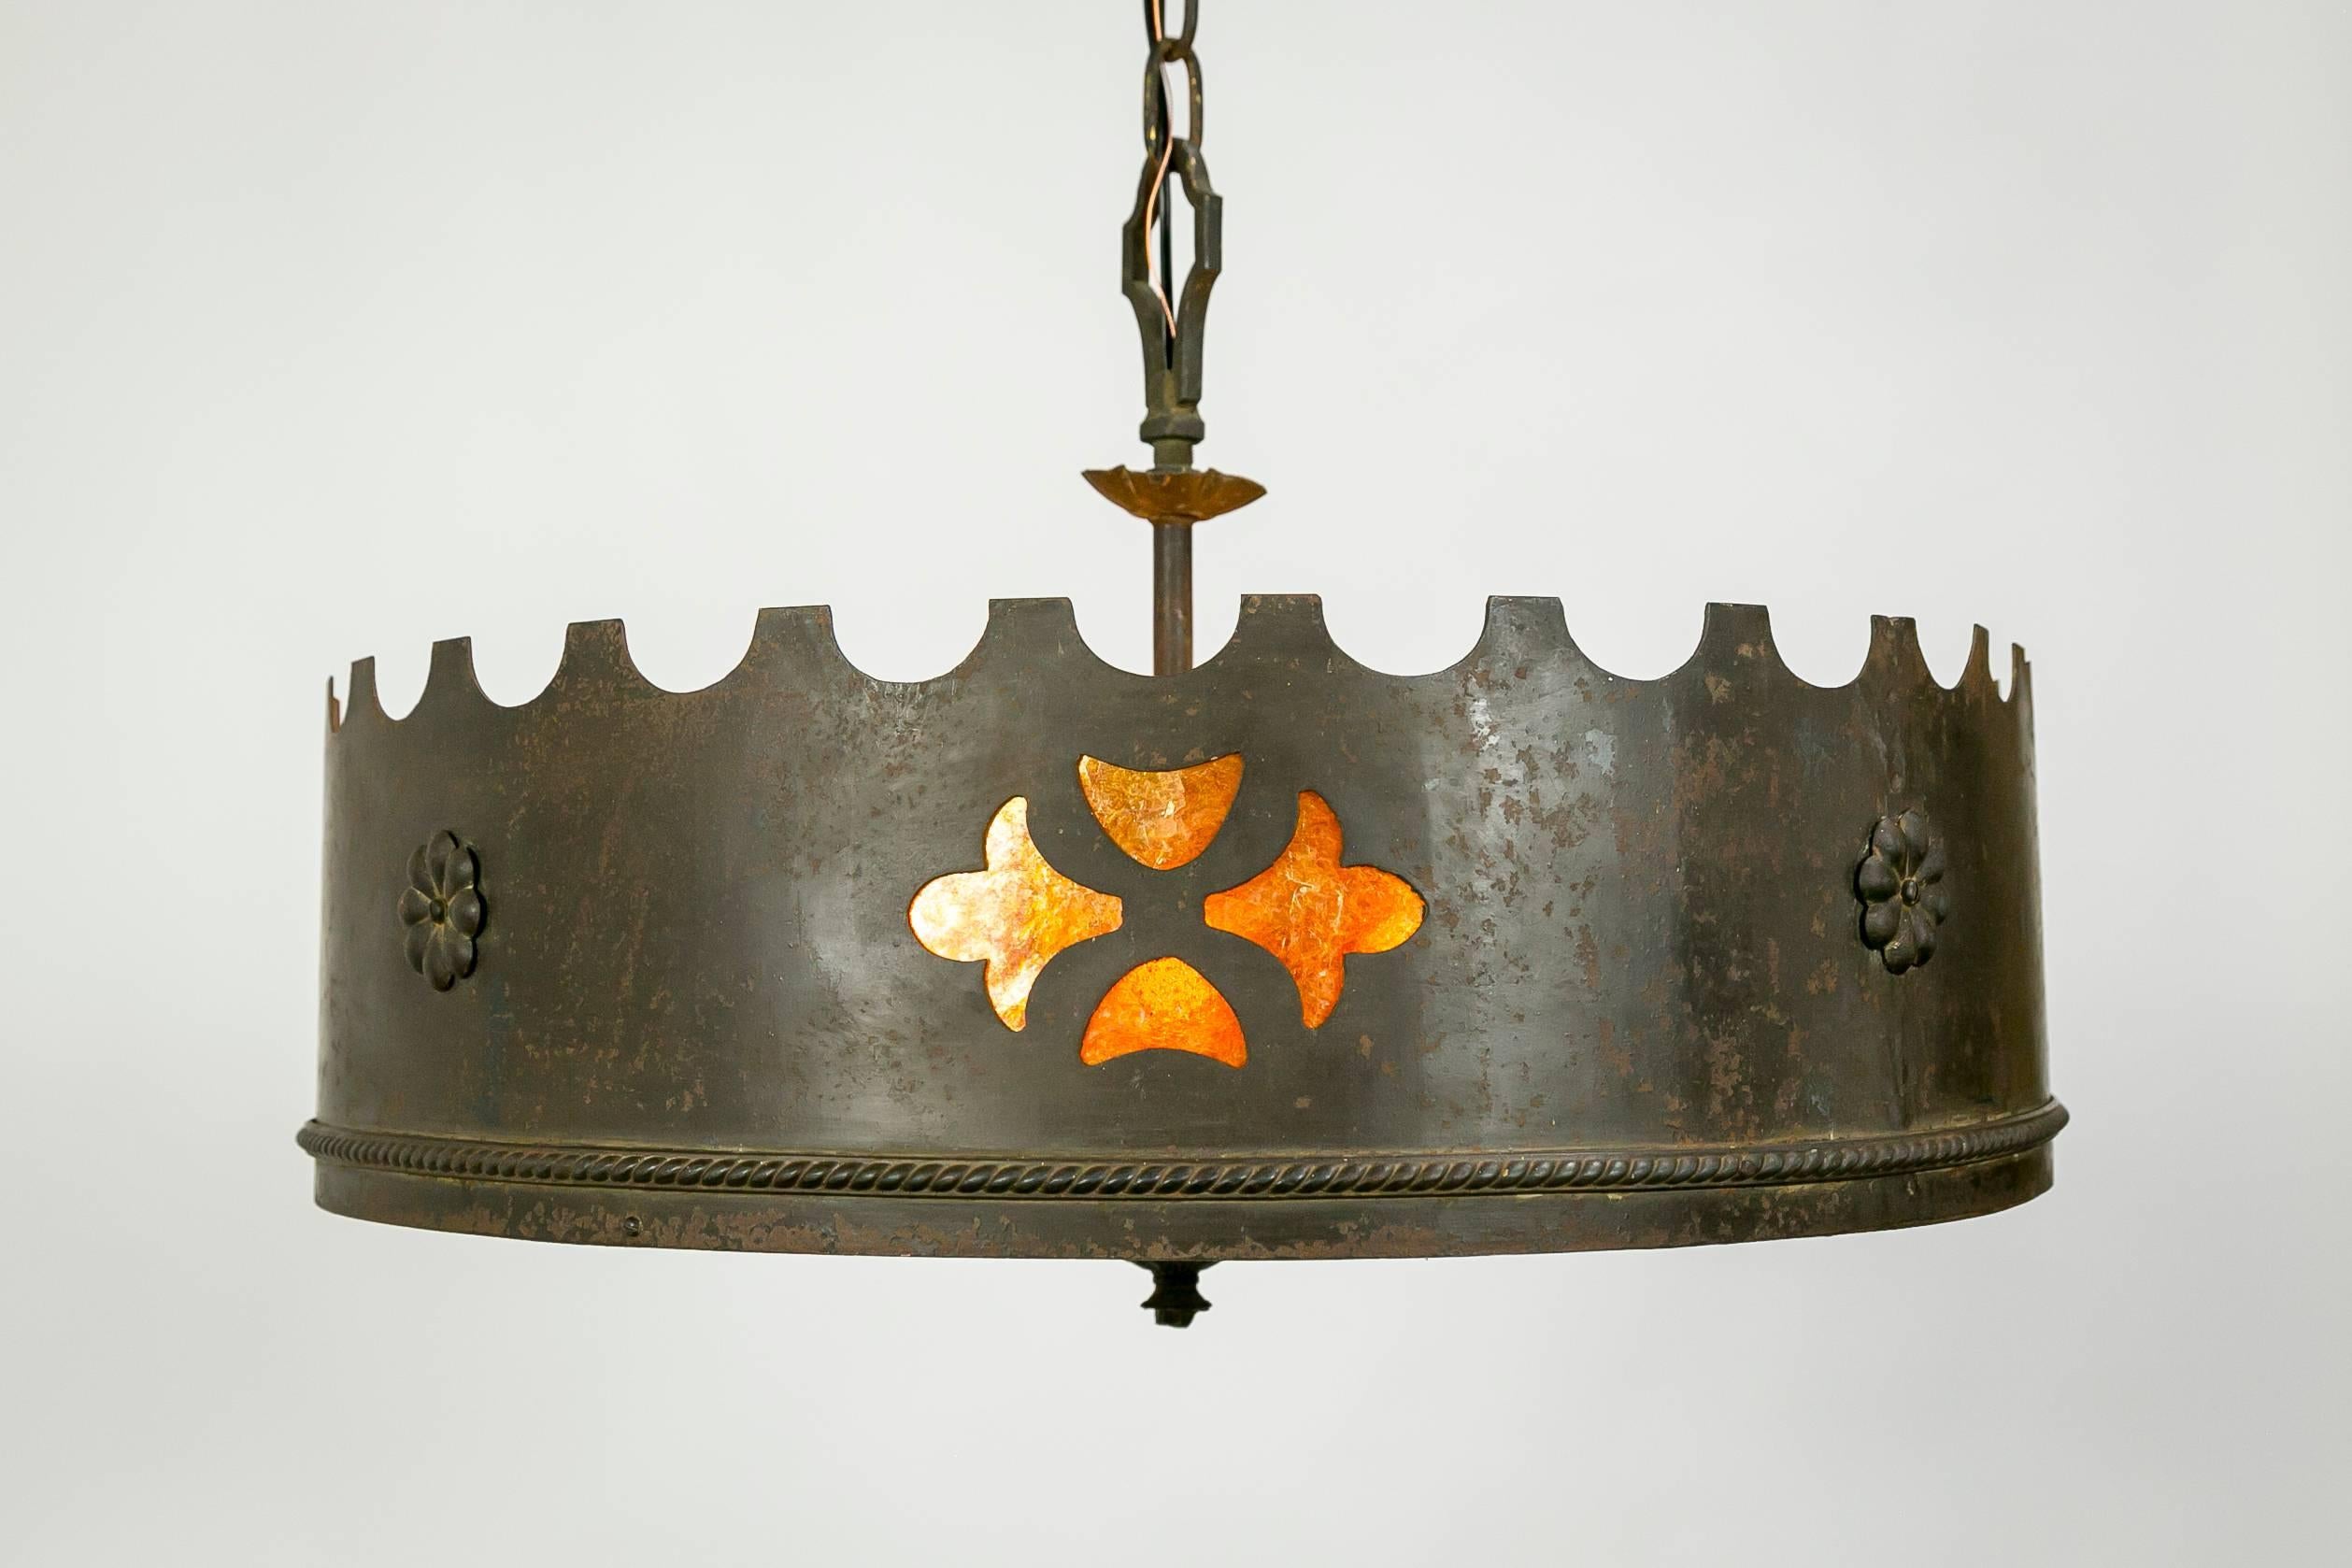 This American, Medieval Revival chandelier is made of forged iron and gorgeous mica, with decorative iron chain and 6 sockets.  Fabricated between 1910-1930, this piece is most likely from Beverly Hills, where this style was the most popular.  This